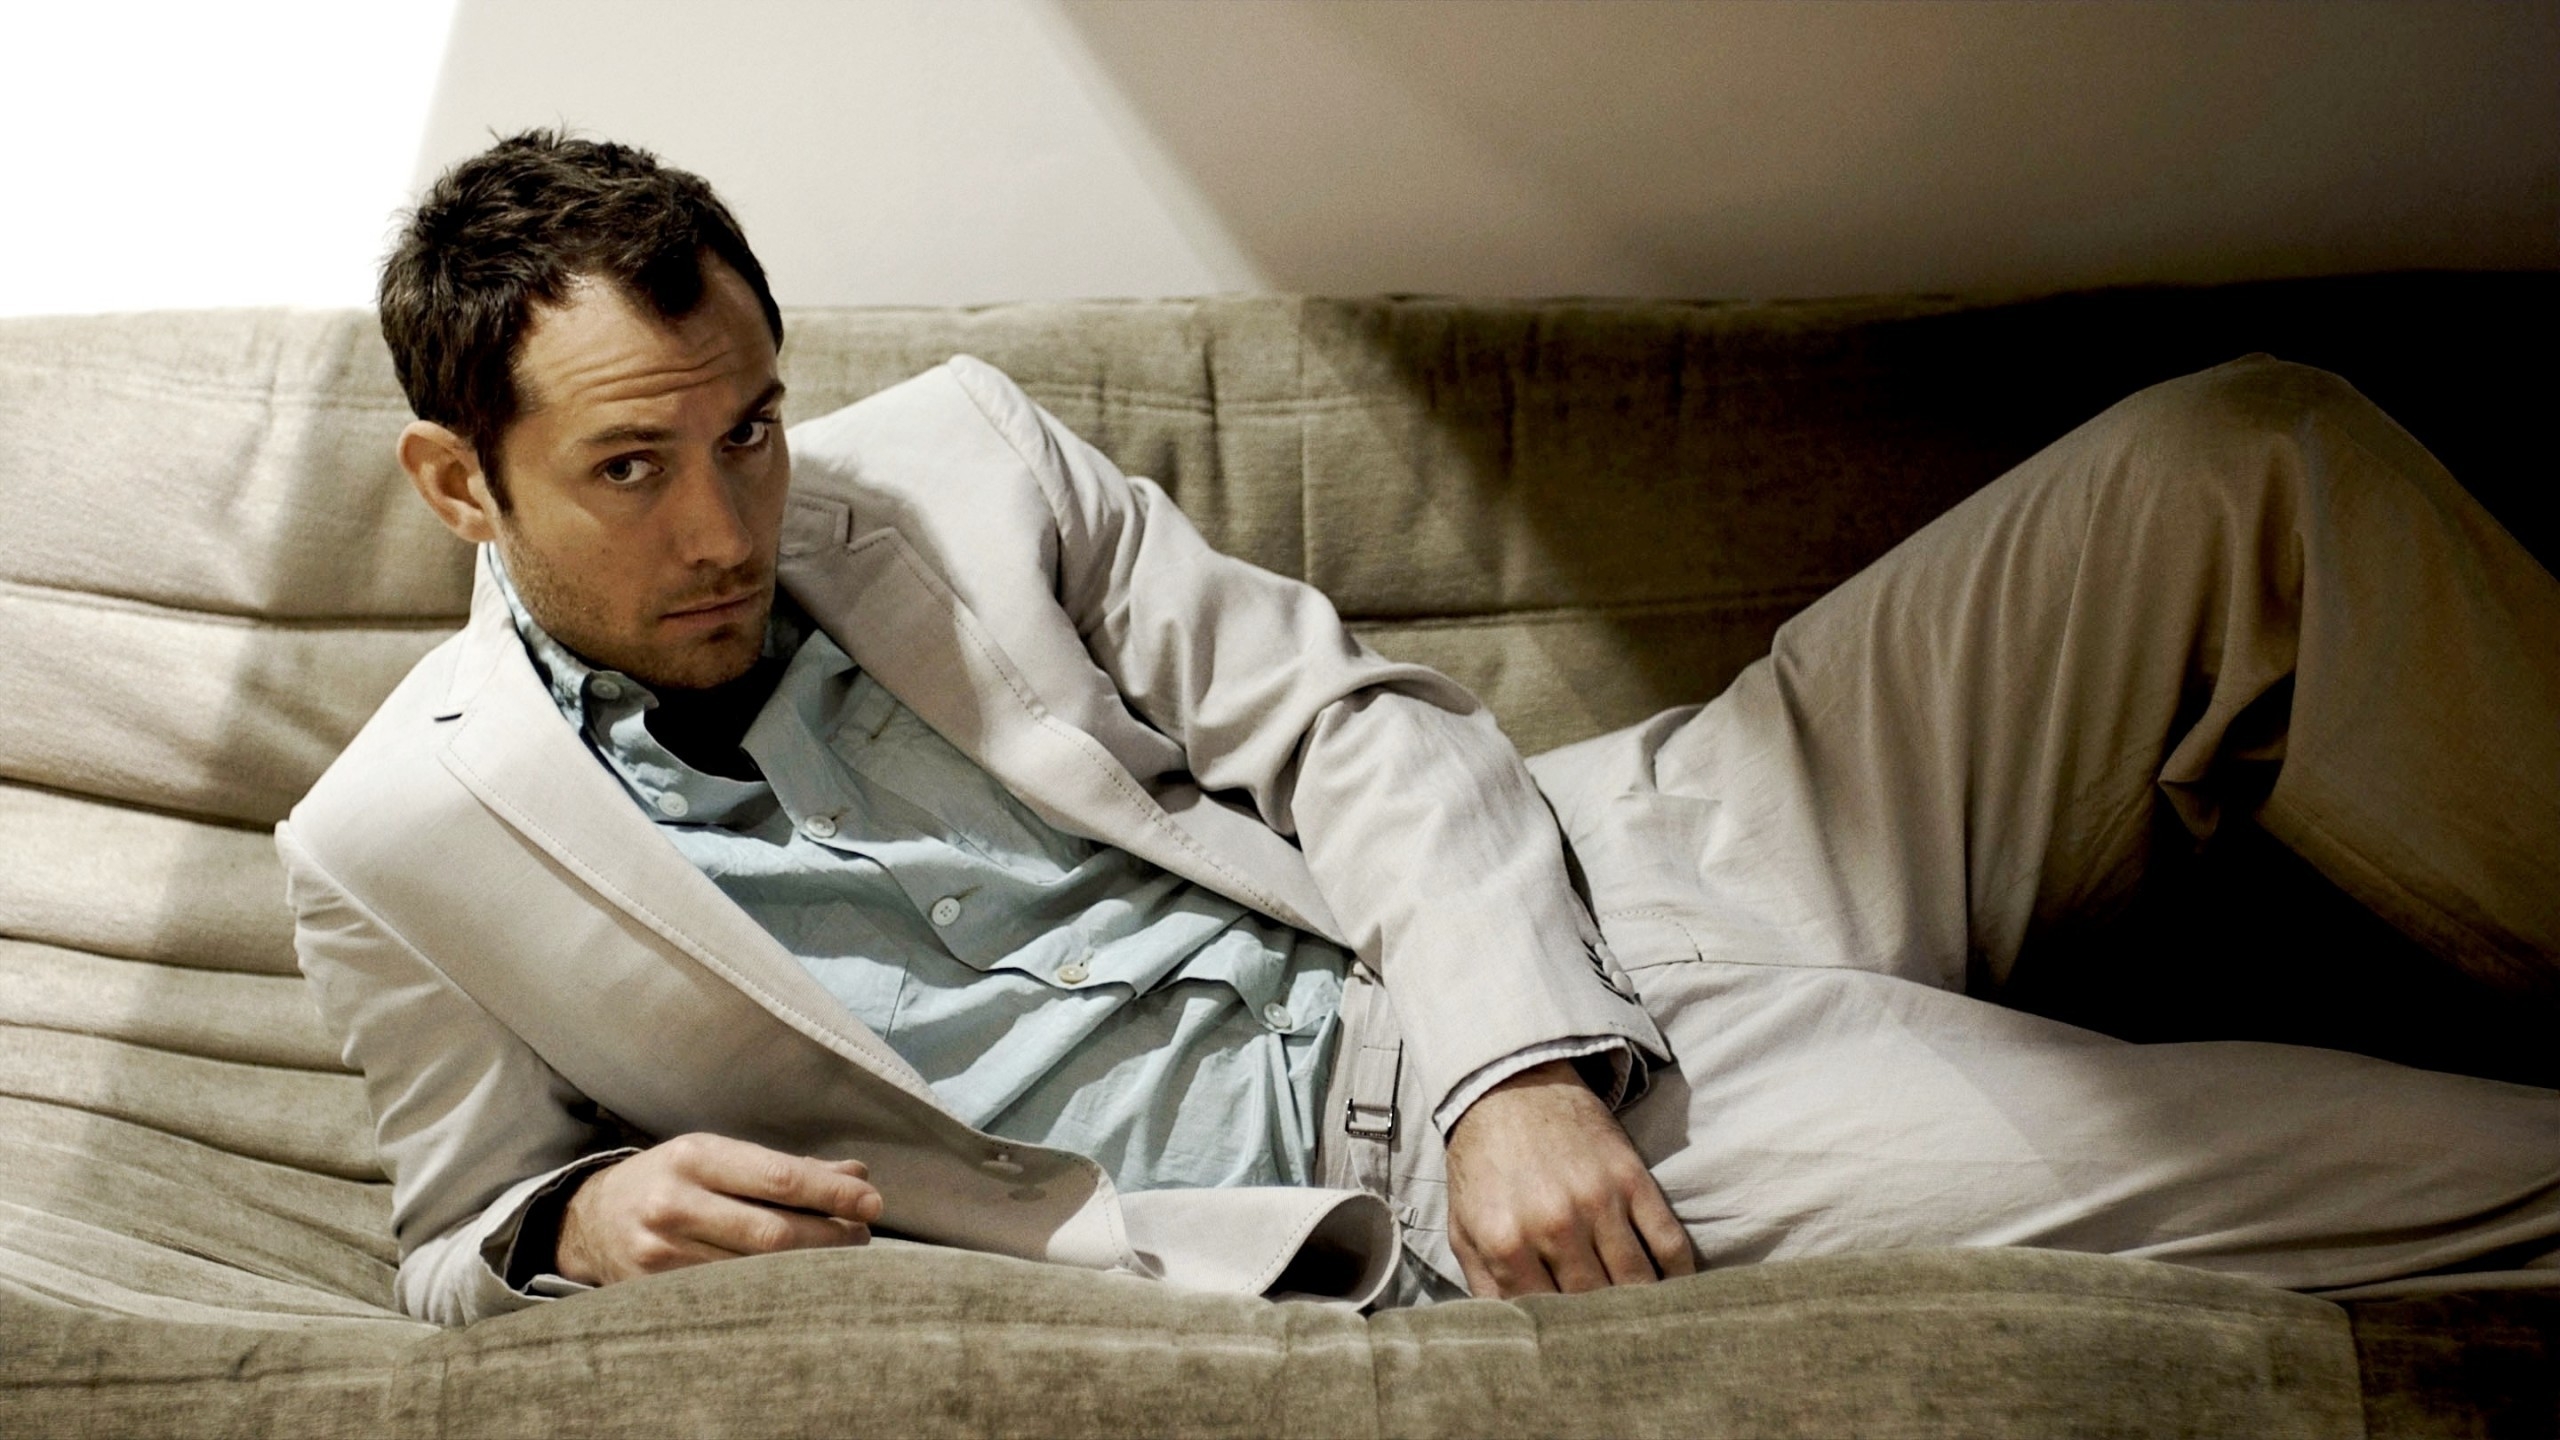 Jude Law Relaxing for 2560x1440 HDTV resolution